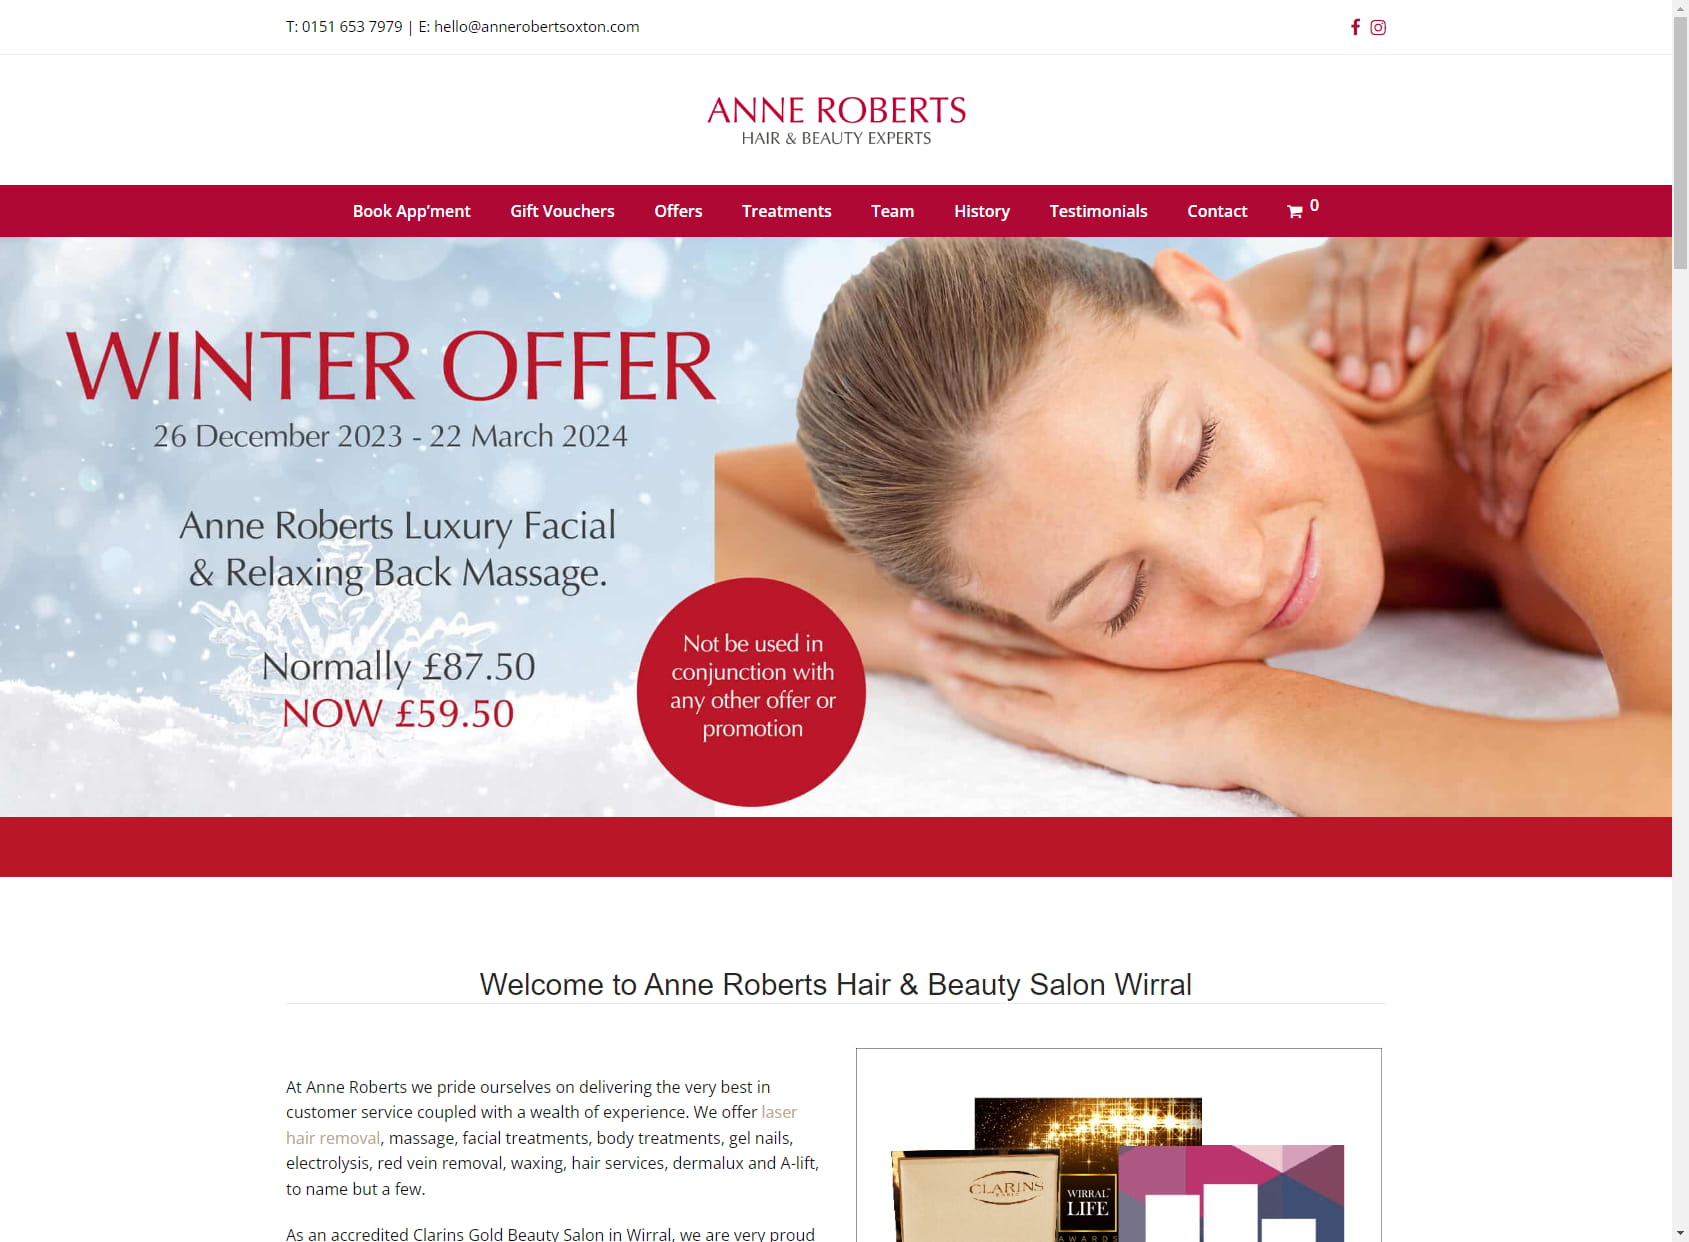 Anne Roberts Hair and Beauty